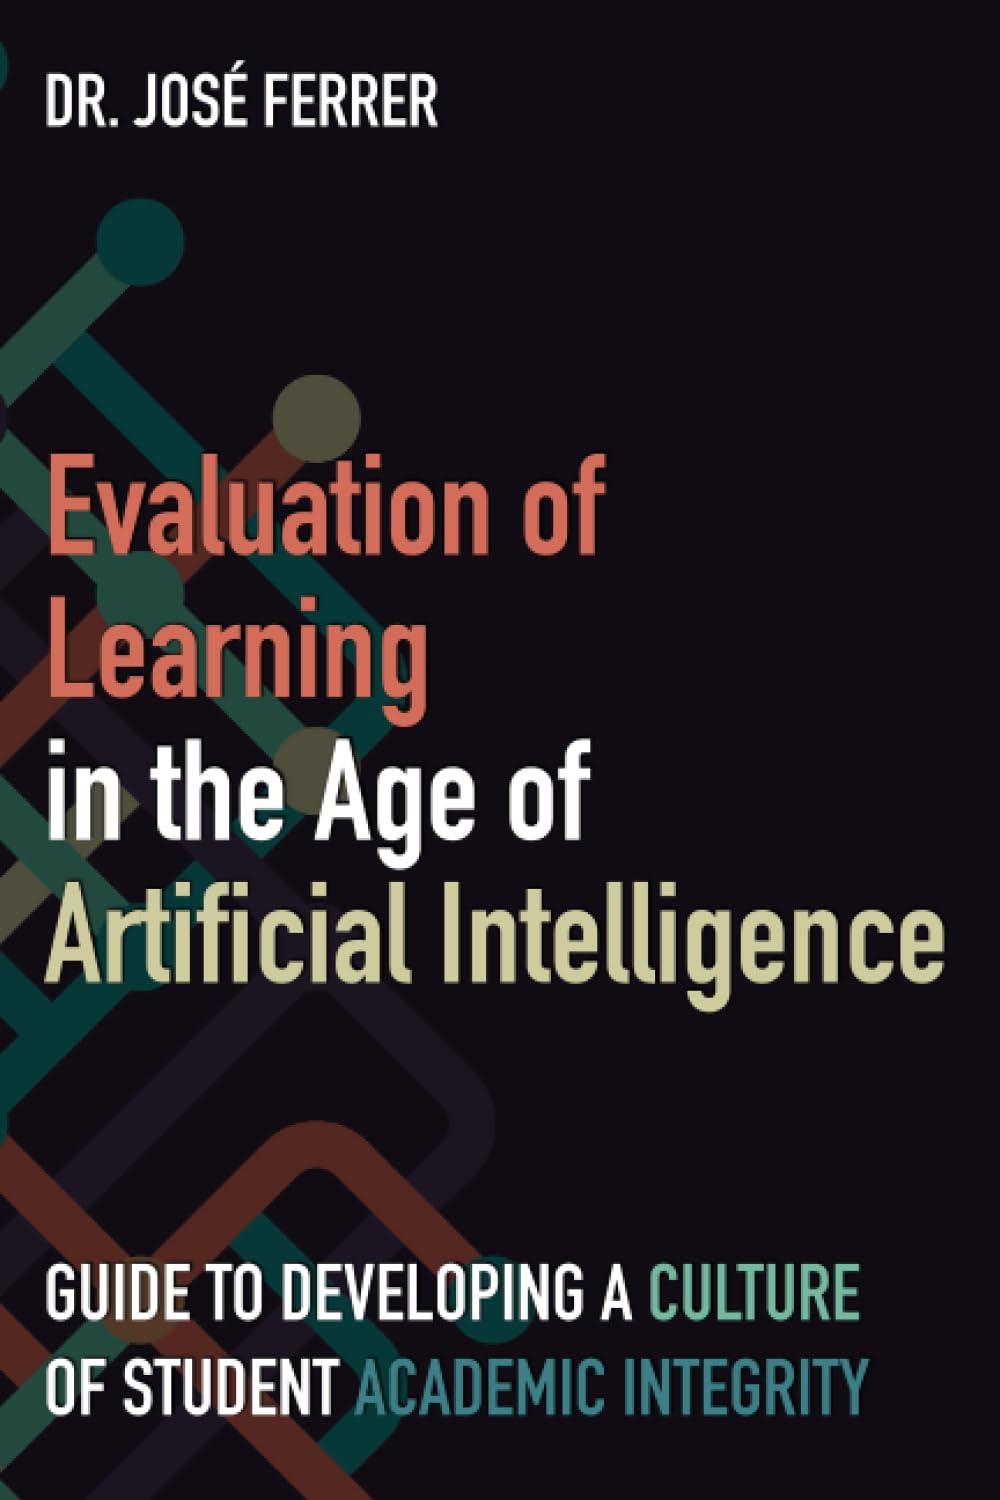 evaluation of learning in the age of artificial intelligence guide to developing a culture of student